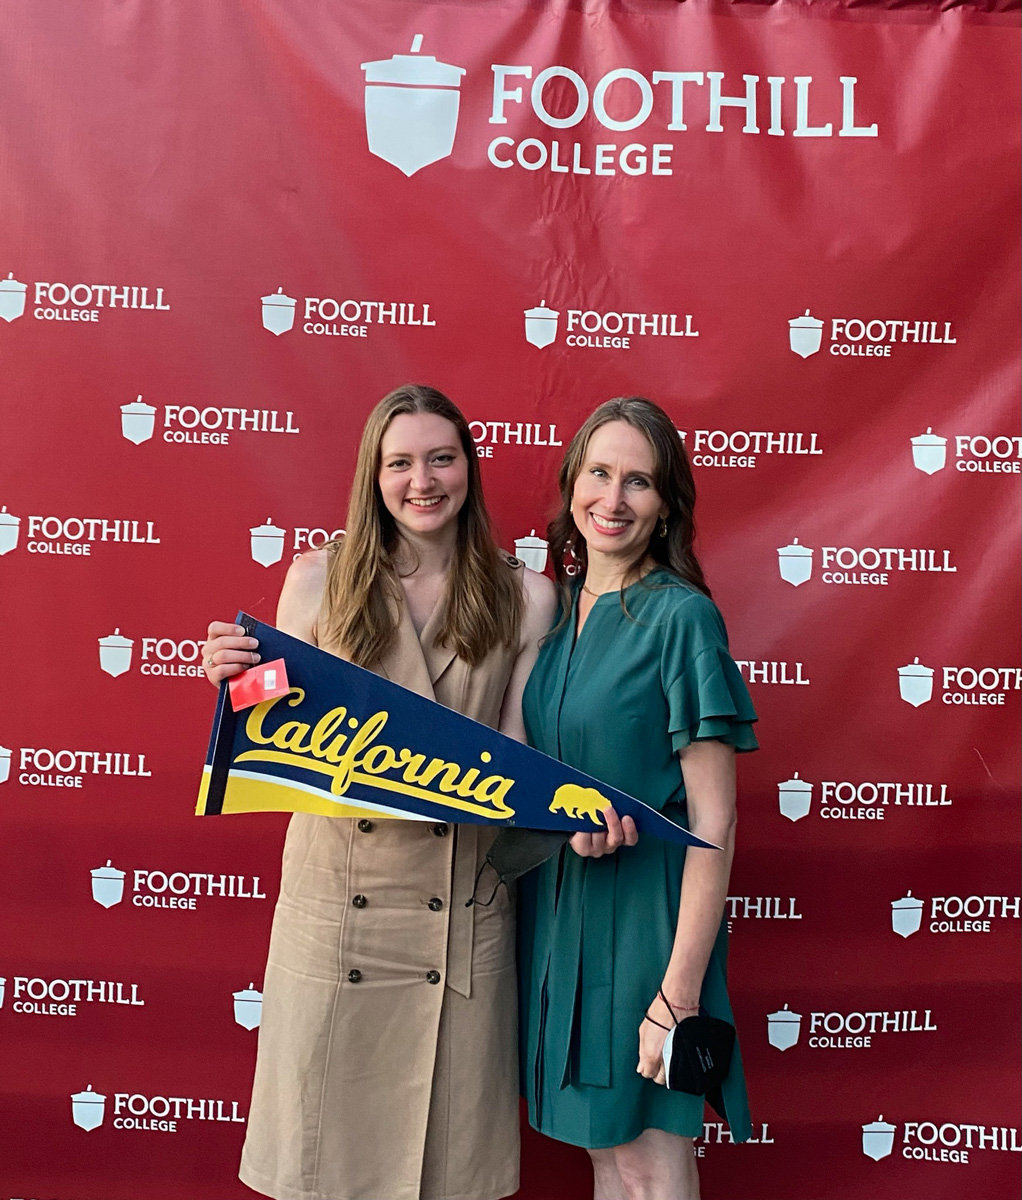 A photo of two women holding a a Cal pennant in front of sign reading Foothill College